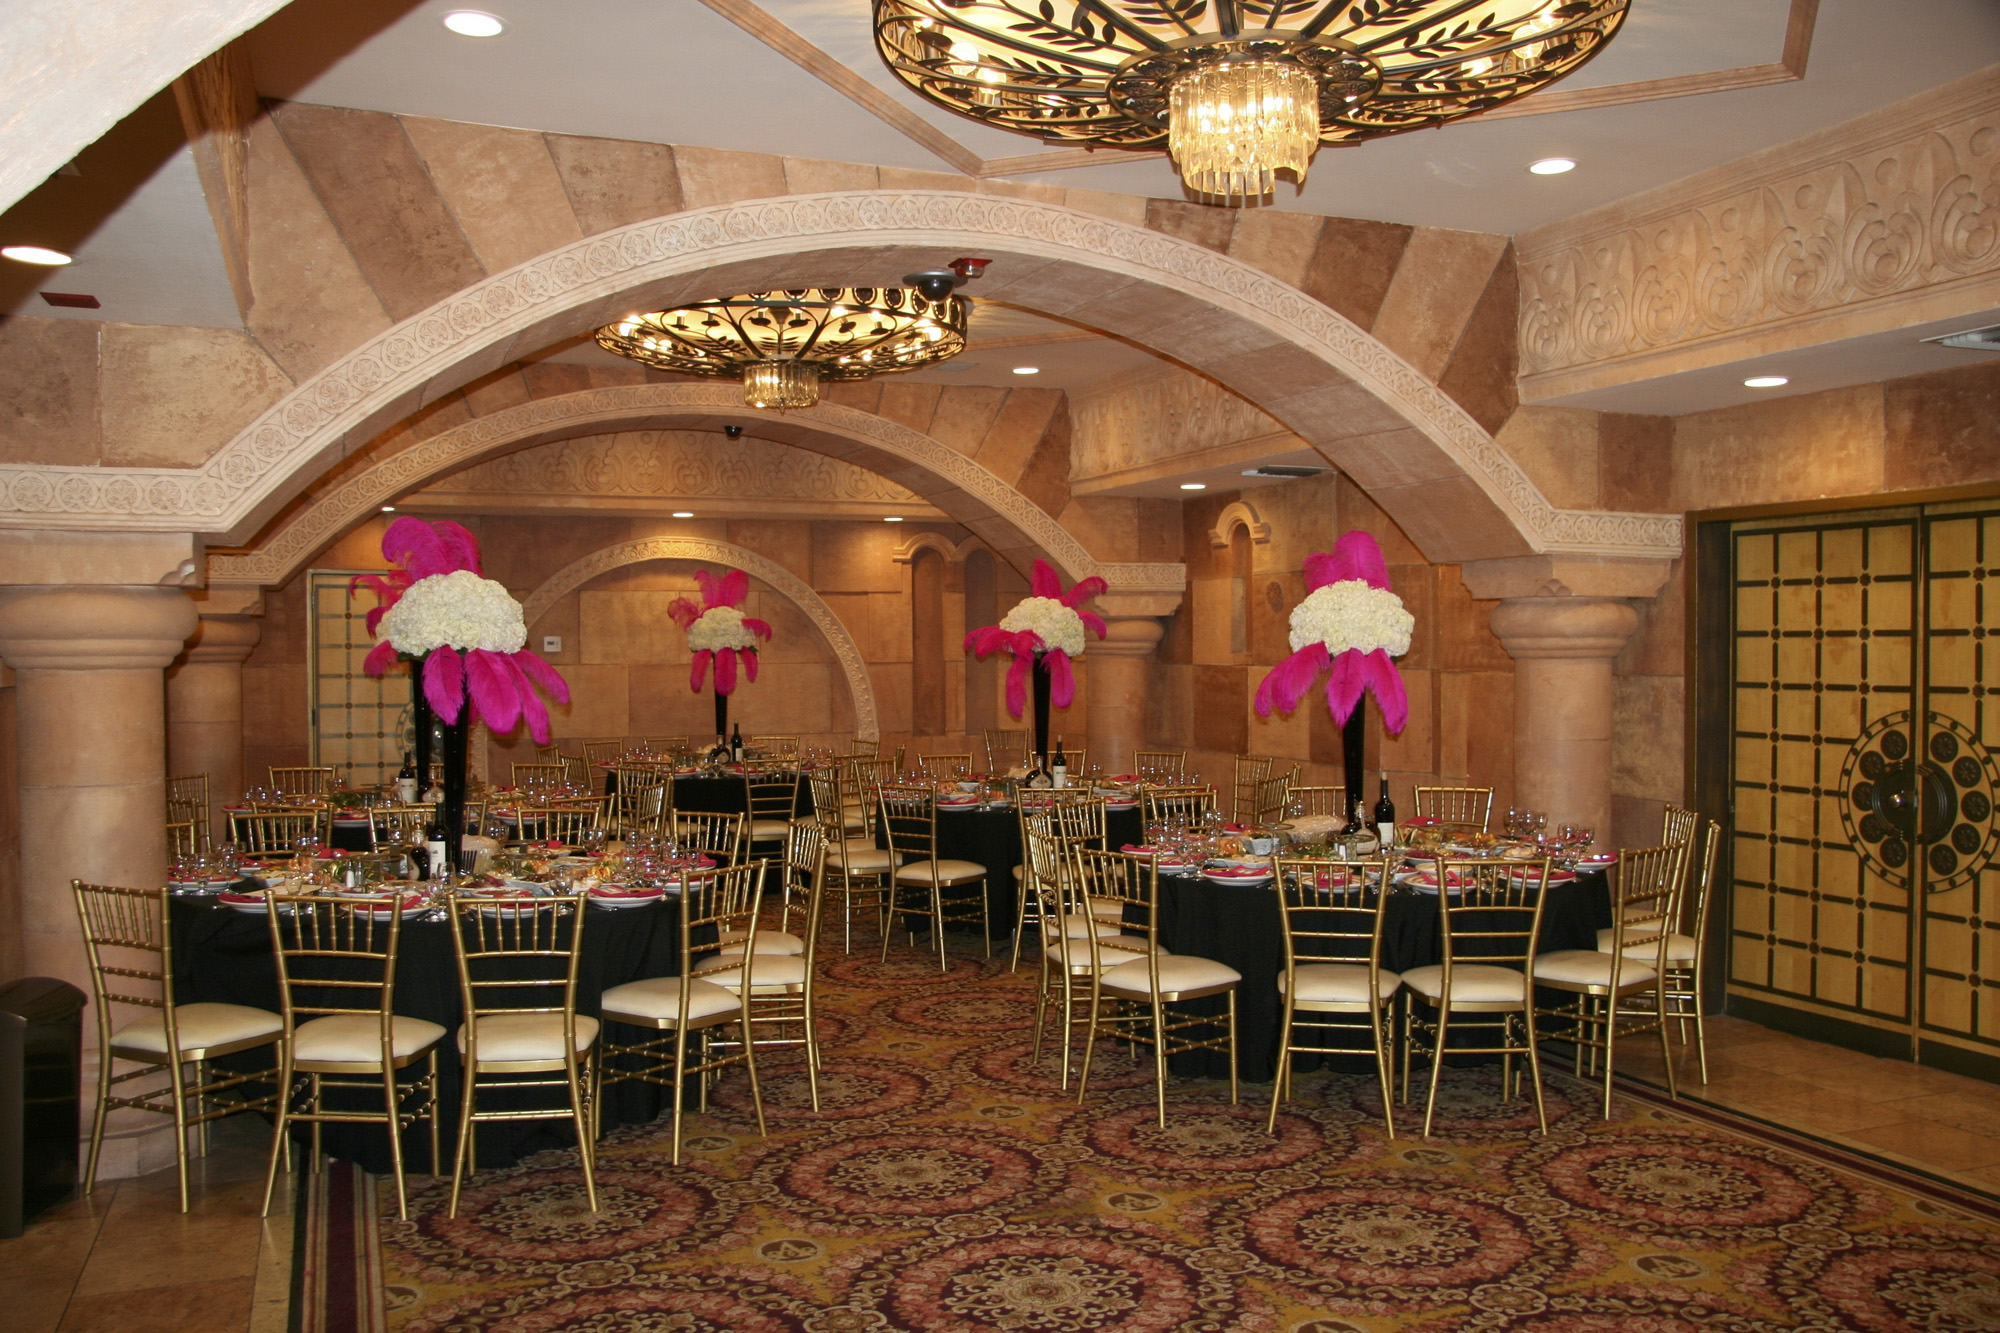 Small Event Wedding Venue In N Hollywood Le Foyer Lounge